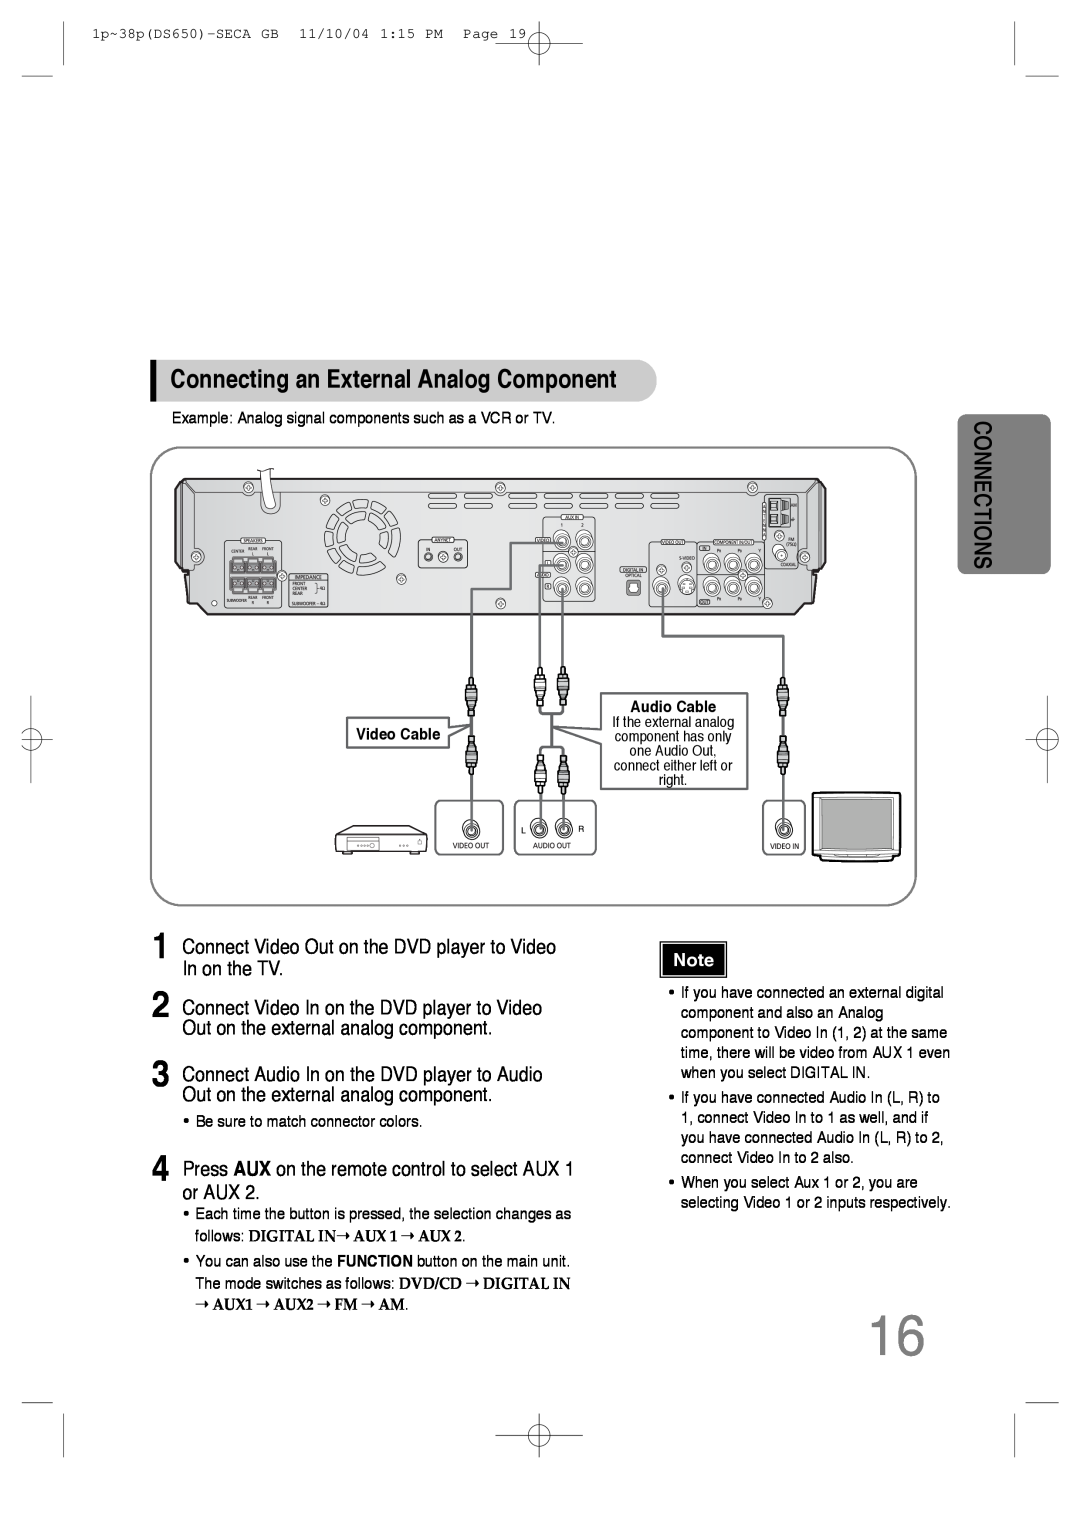 Samsung HT-DS650 instruction manual Connecting an External Analog Component, Connections, Video Cable 